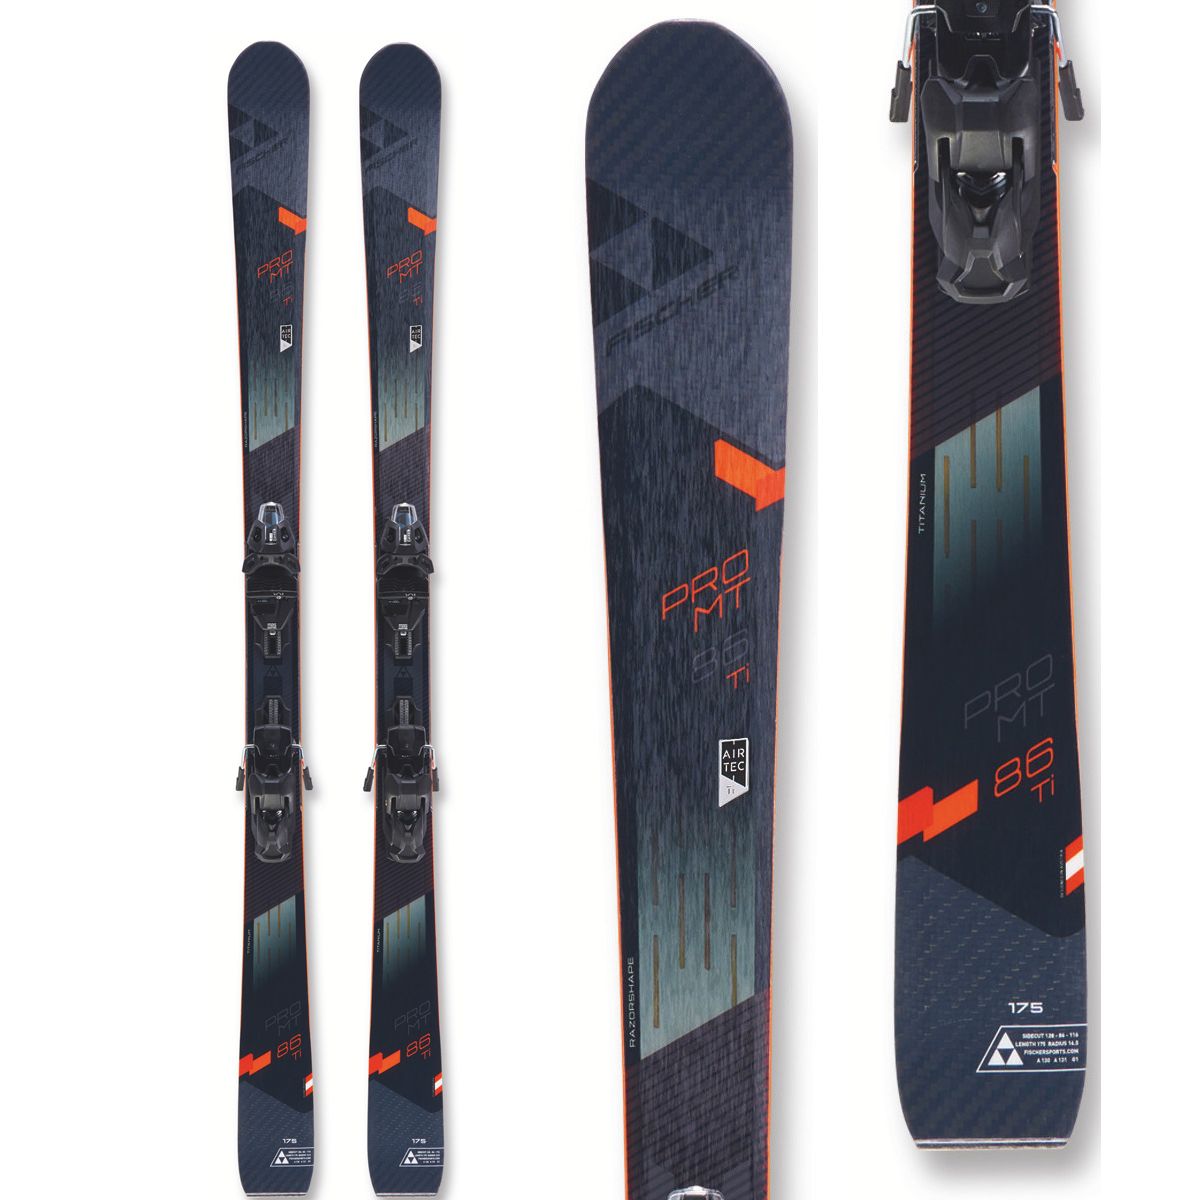 Pack Skis PRO MT 86 TI + Fix ATTACK 13 AT